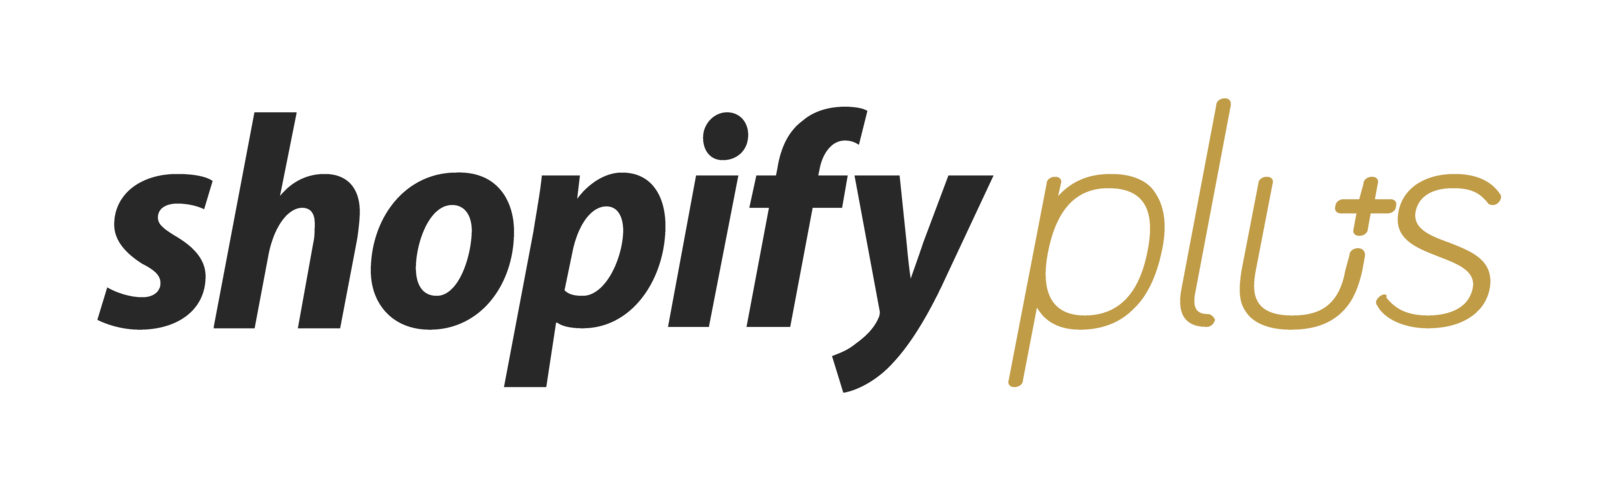 Shopify Plus Logo - Shopify Plus vs. Magento (Spoiler: Magento Wins in Only 6 Cases ...